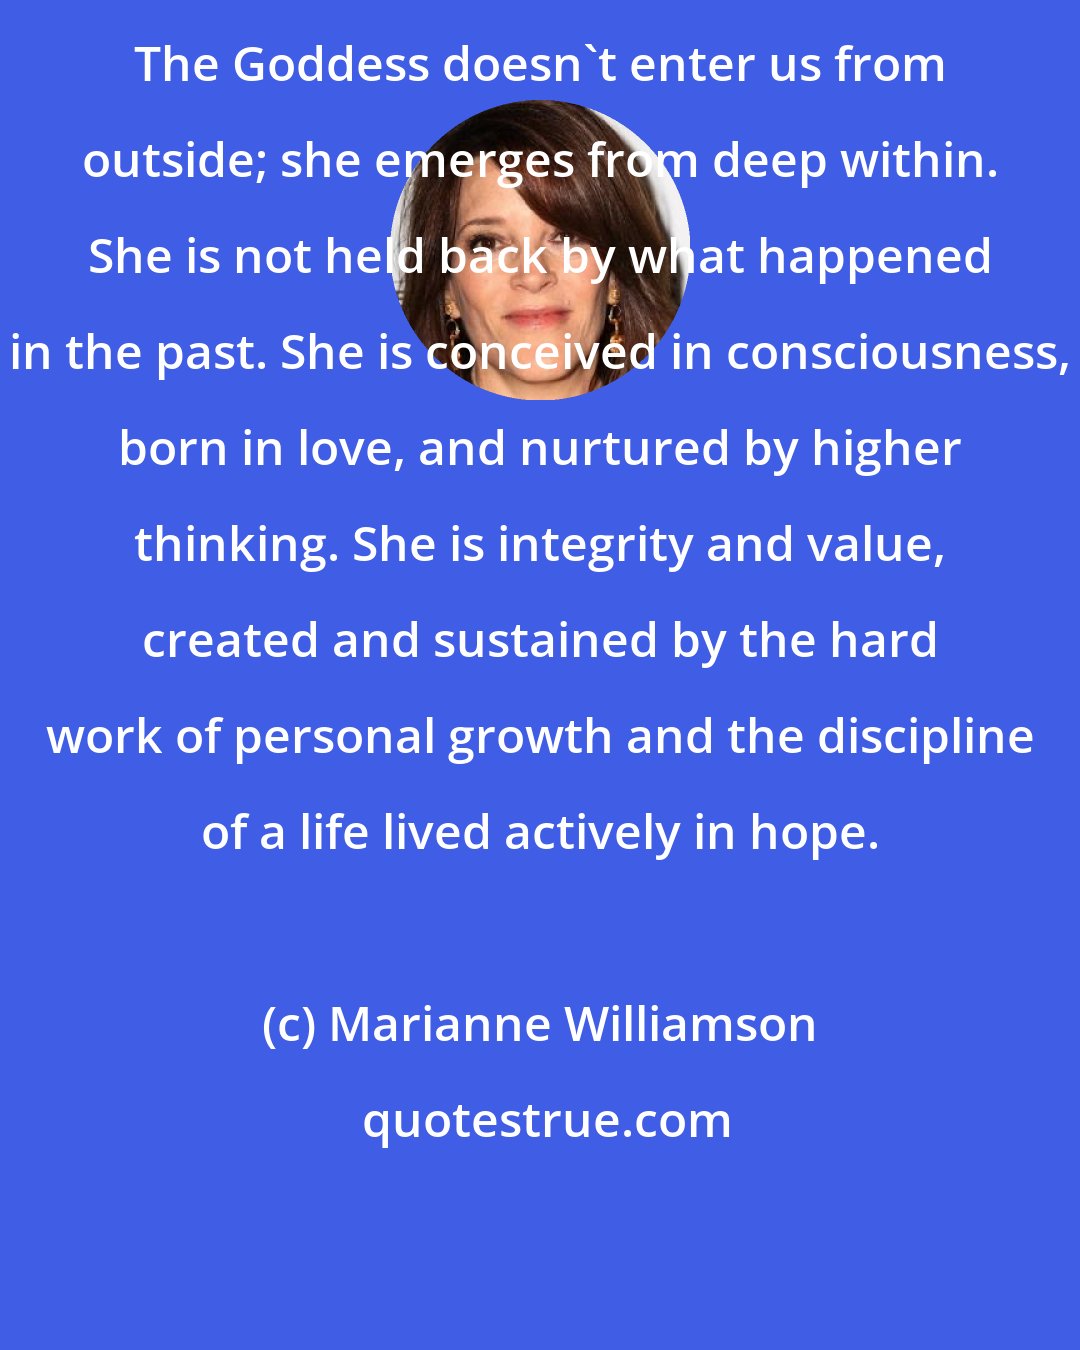 Marianne Williamson: The Goddess doesn't enter us from outside; she emerges from deep within. She is not held back by what happened in the past. She is conceived in consciousness, born in love, and nurtured by higher thinking. She is integrity and value, created and sustained by the hard work of personal growth and the discipline of a life lived actively in hope.